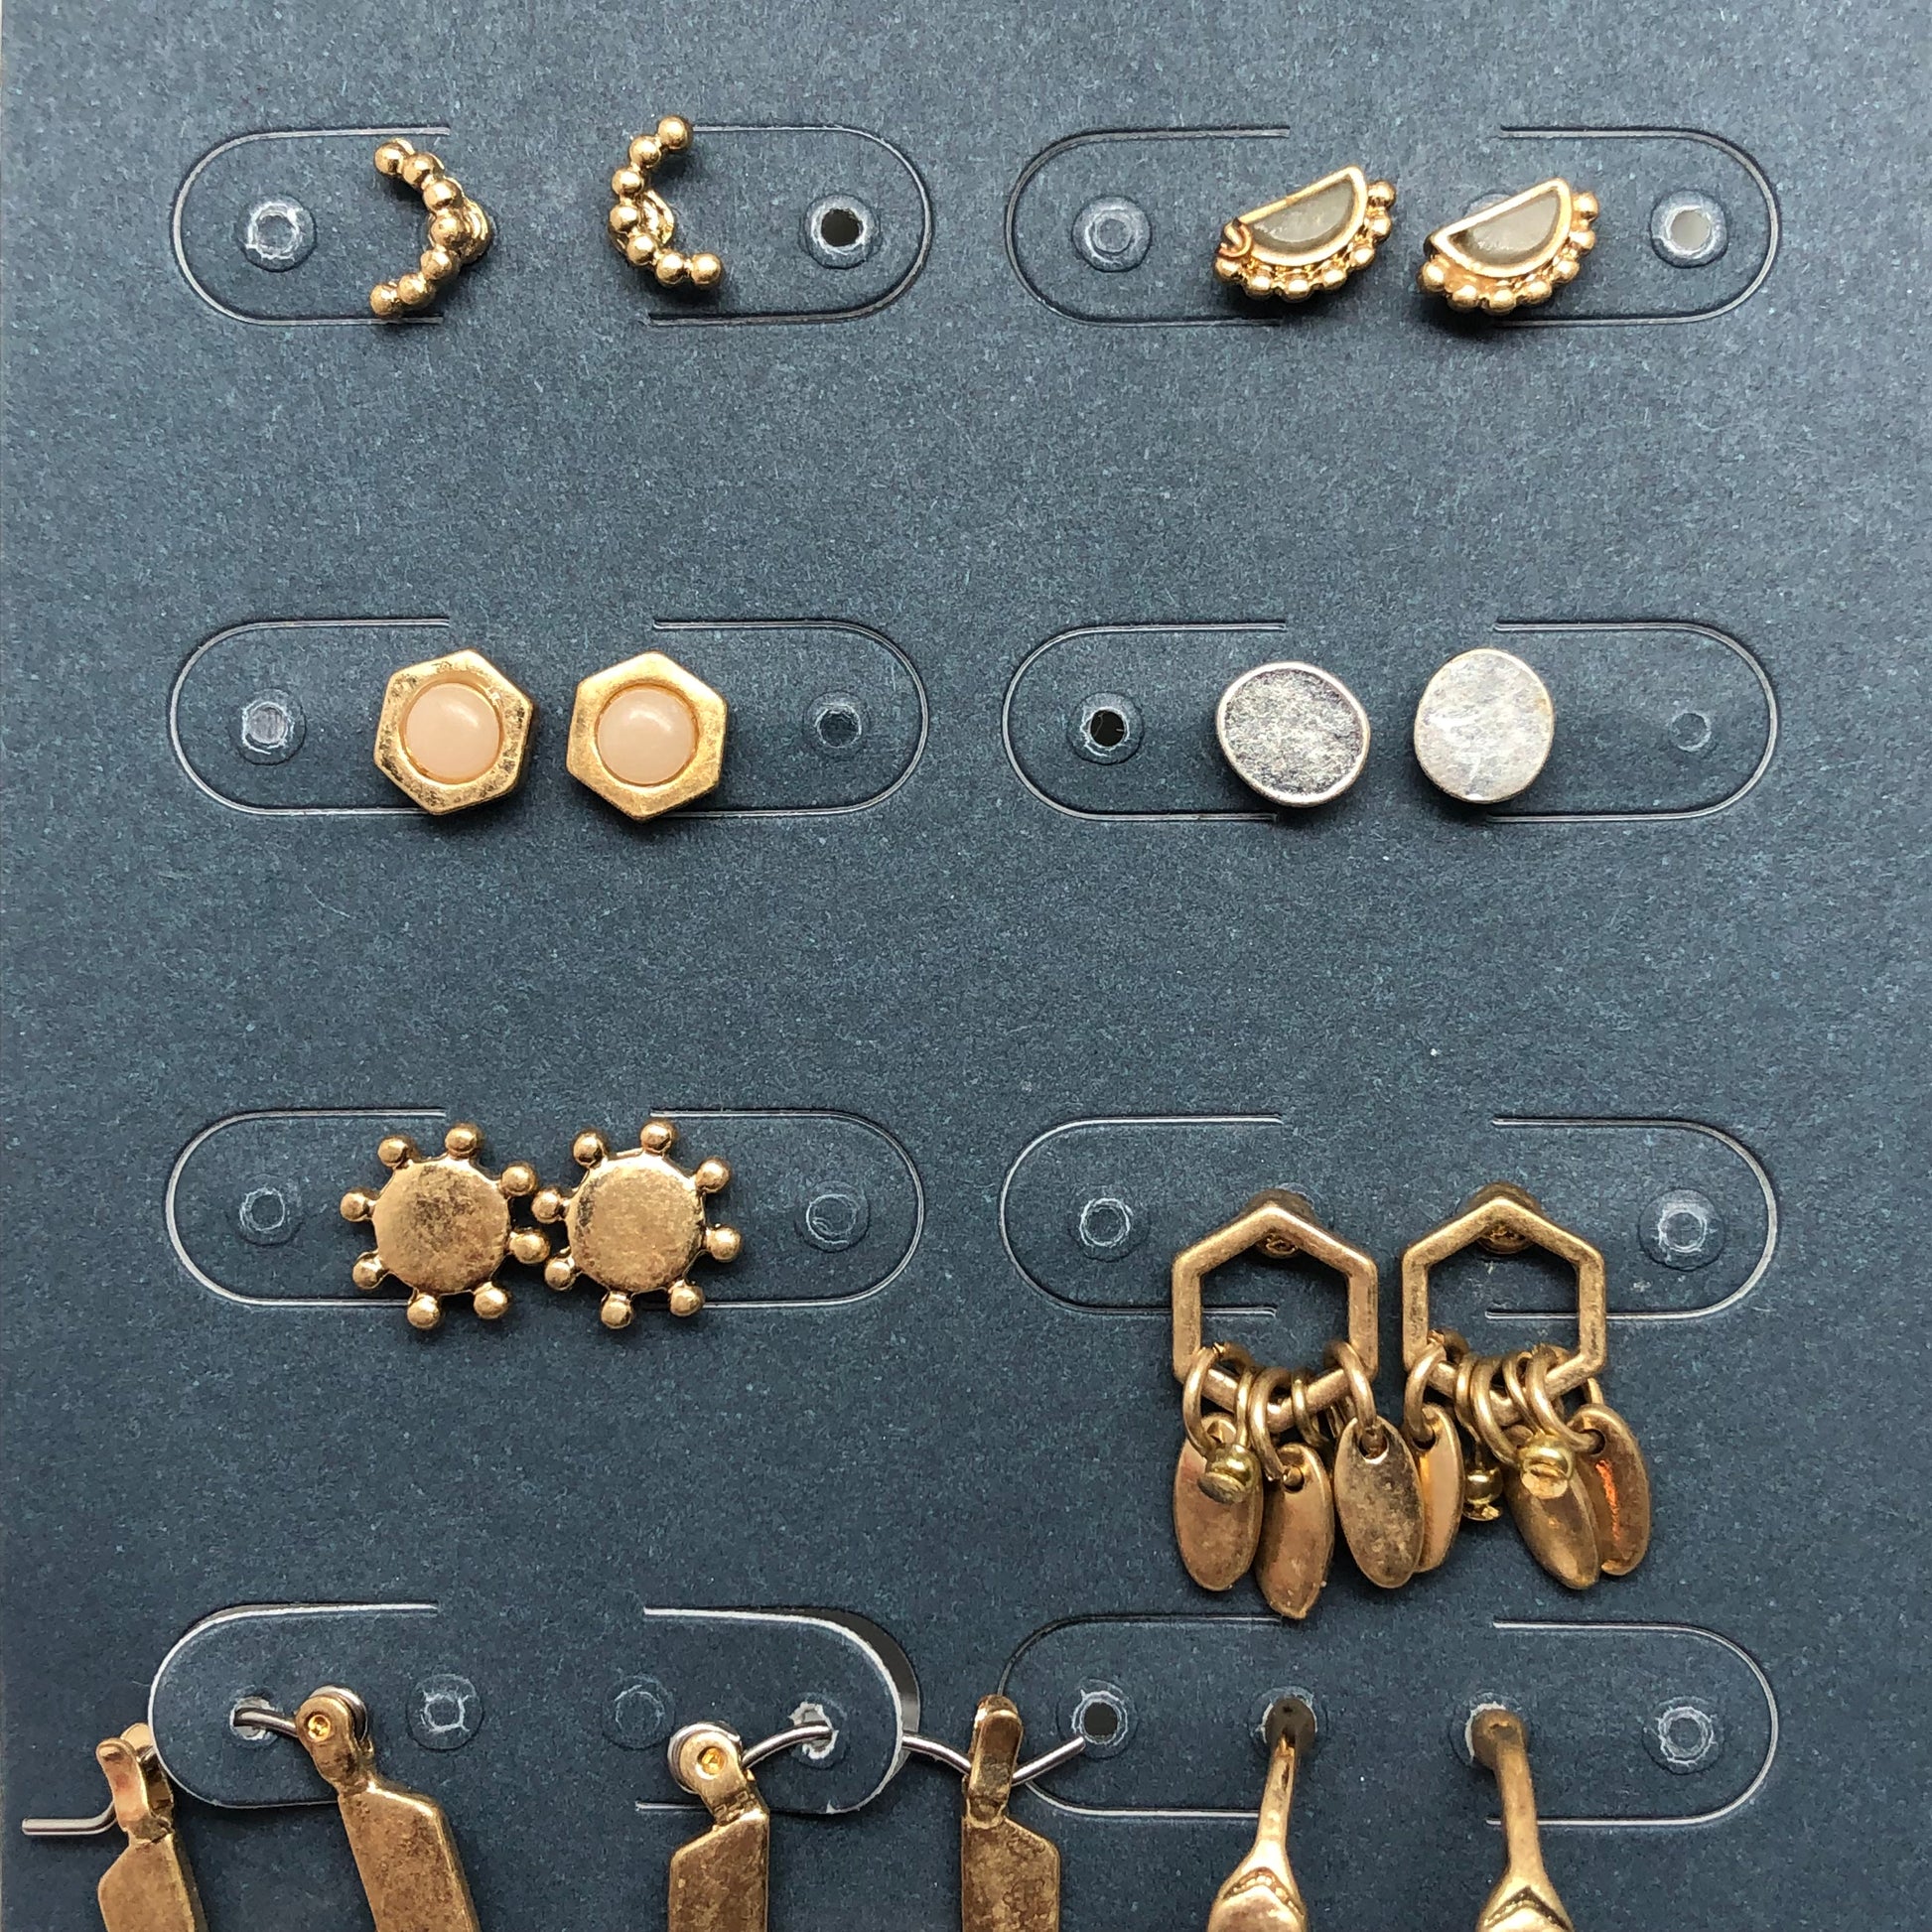 Fashion Jewelry | 8prs Assorted Stylish Bronze Silver Small Hoop & Stud Earrings